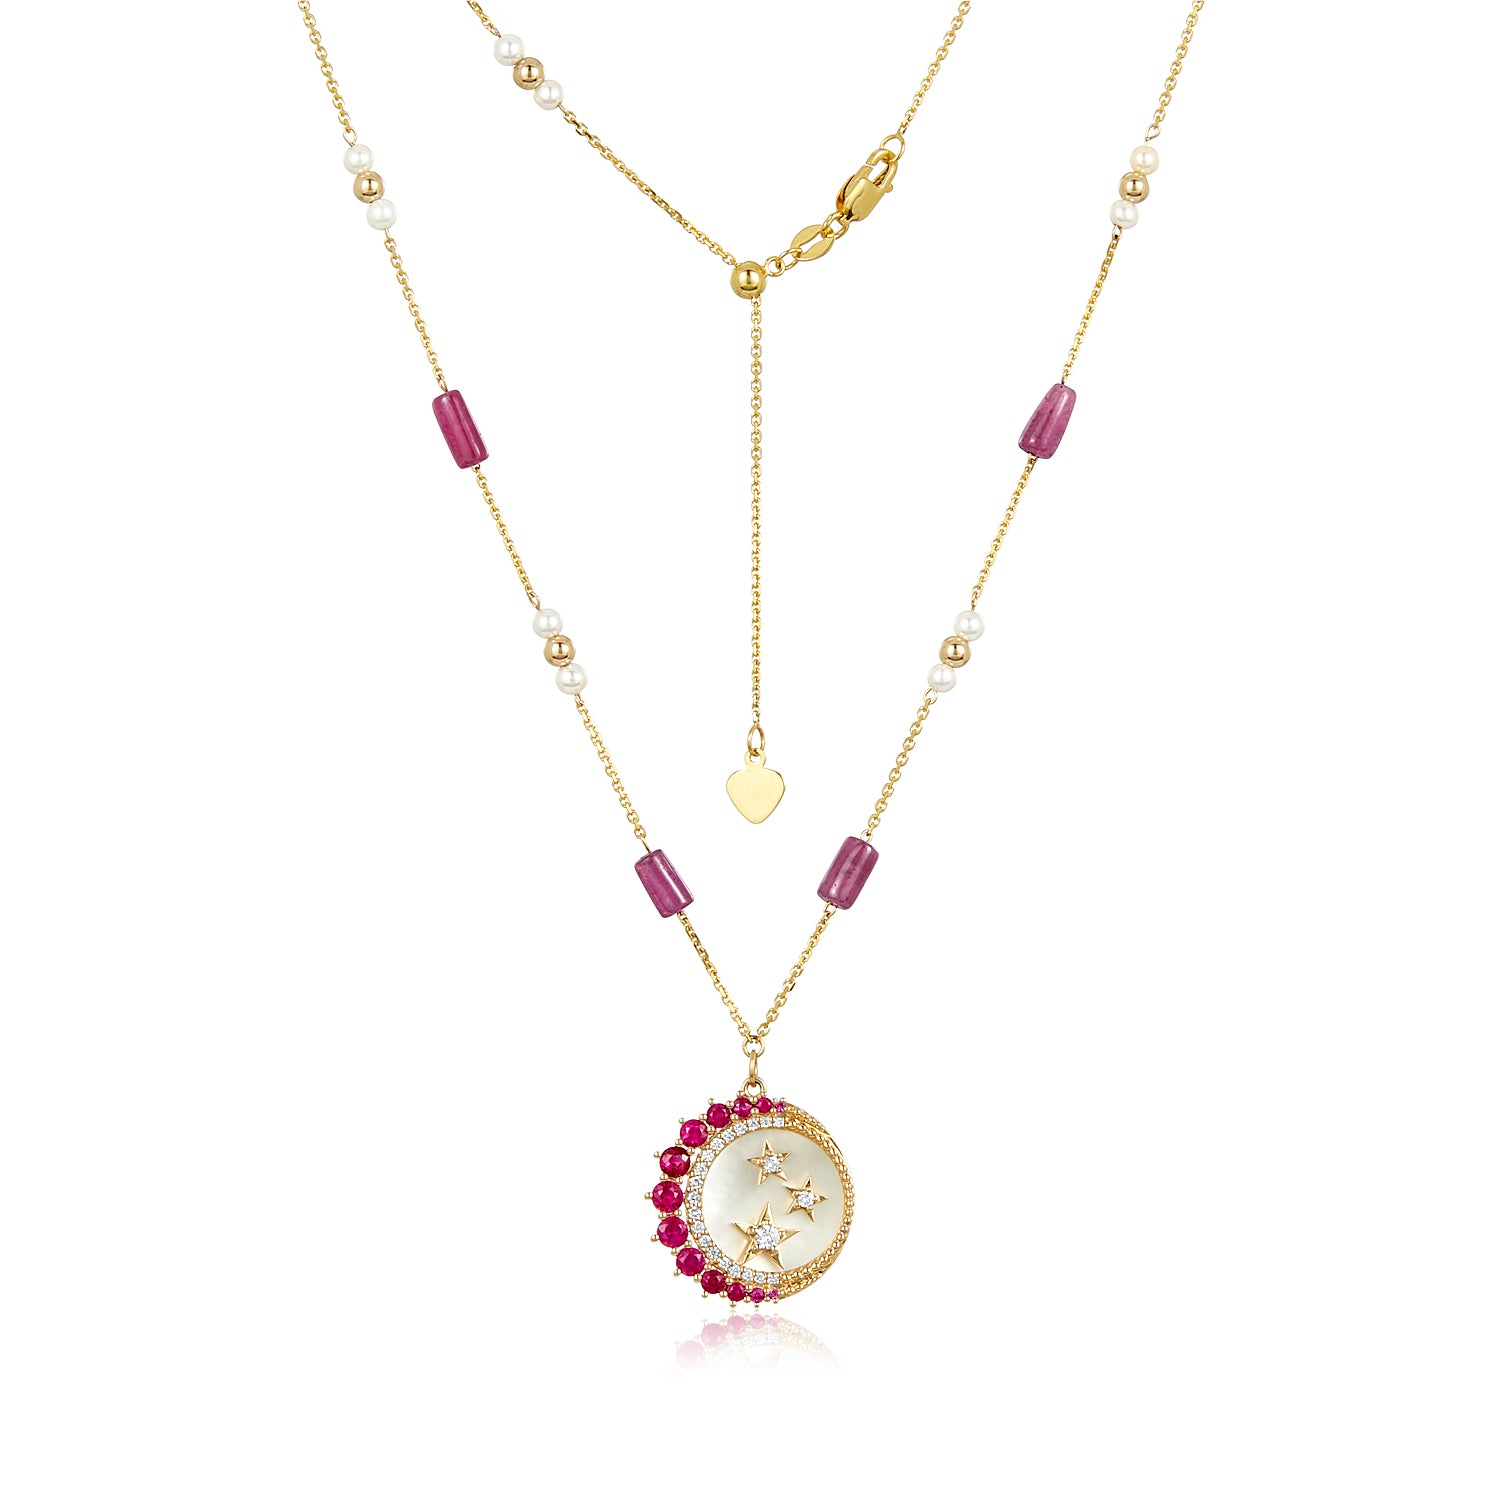 Starry Ruby Mother Of Pearl Pendant Necklace in 14k